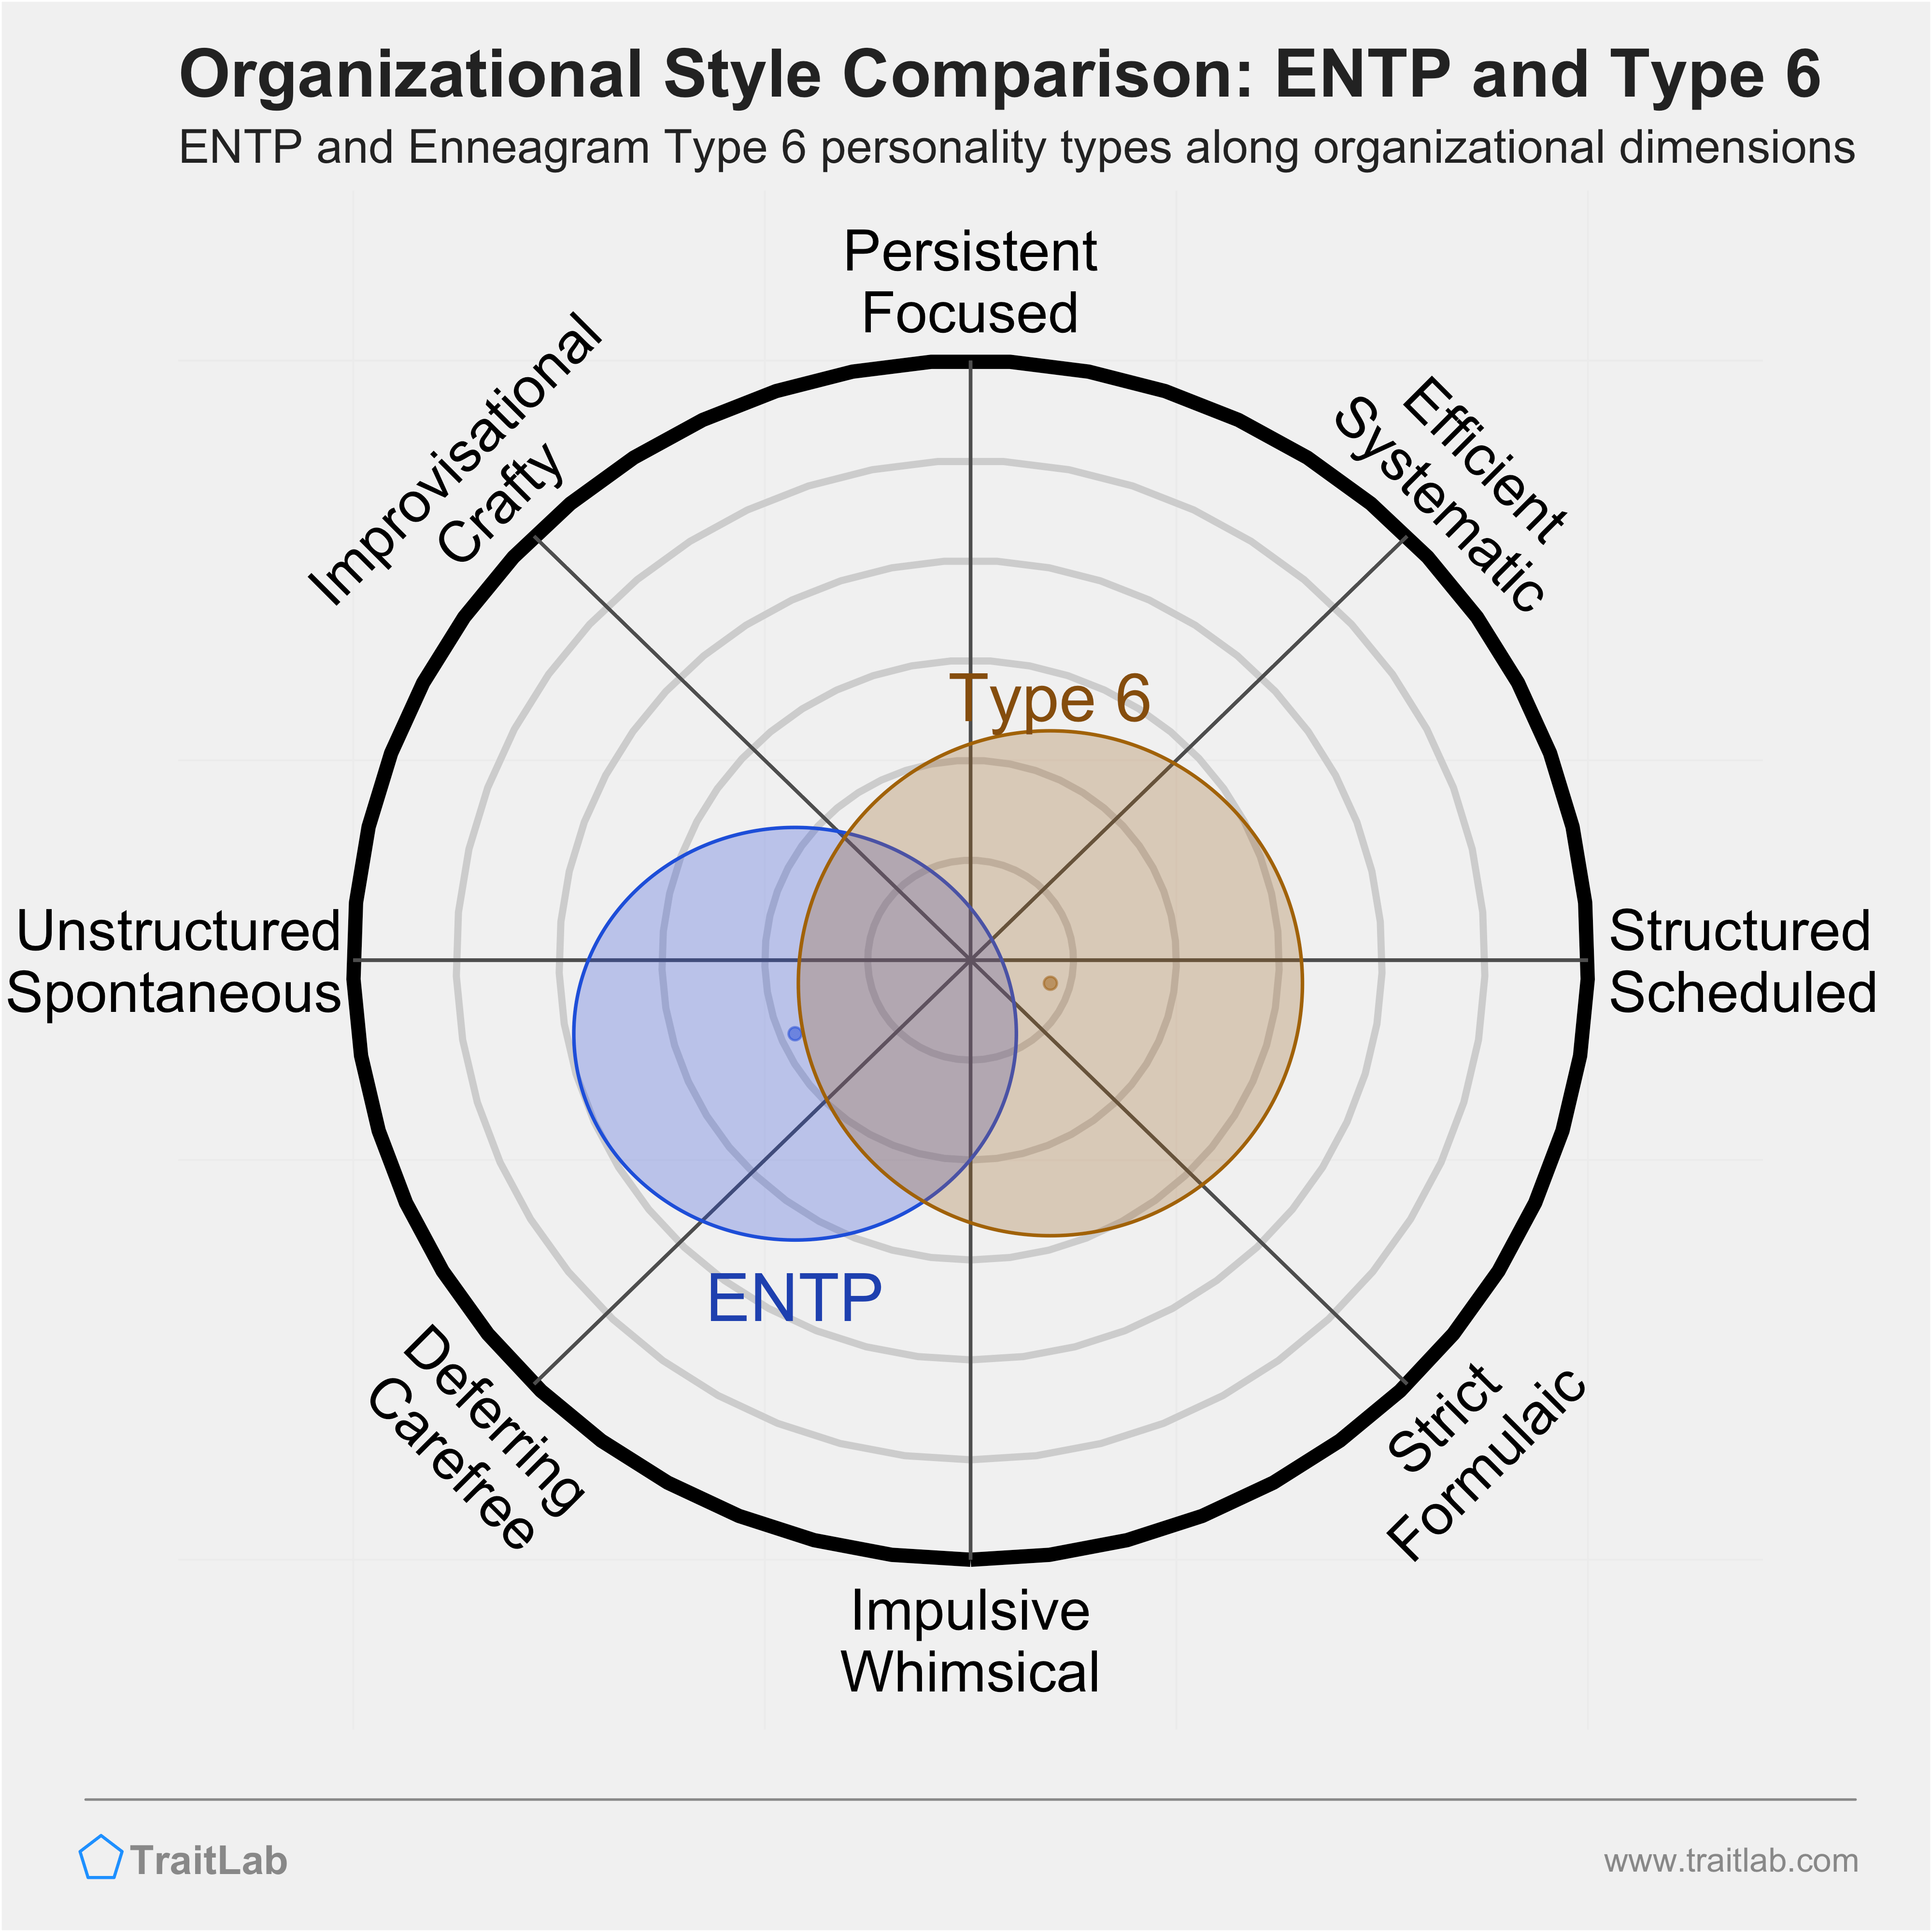 ENTP and Type 6 comparison across organizational dimensions